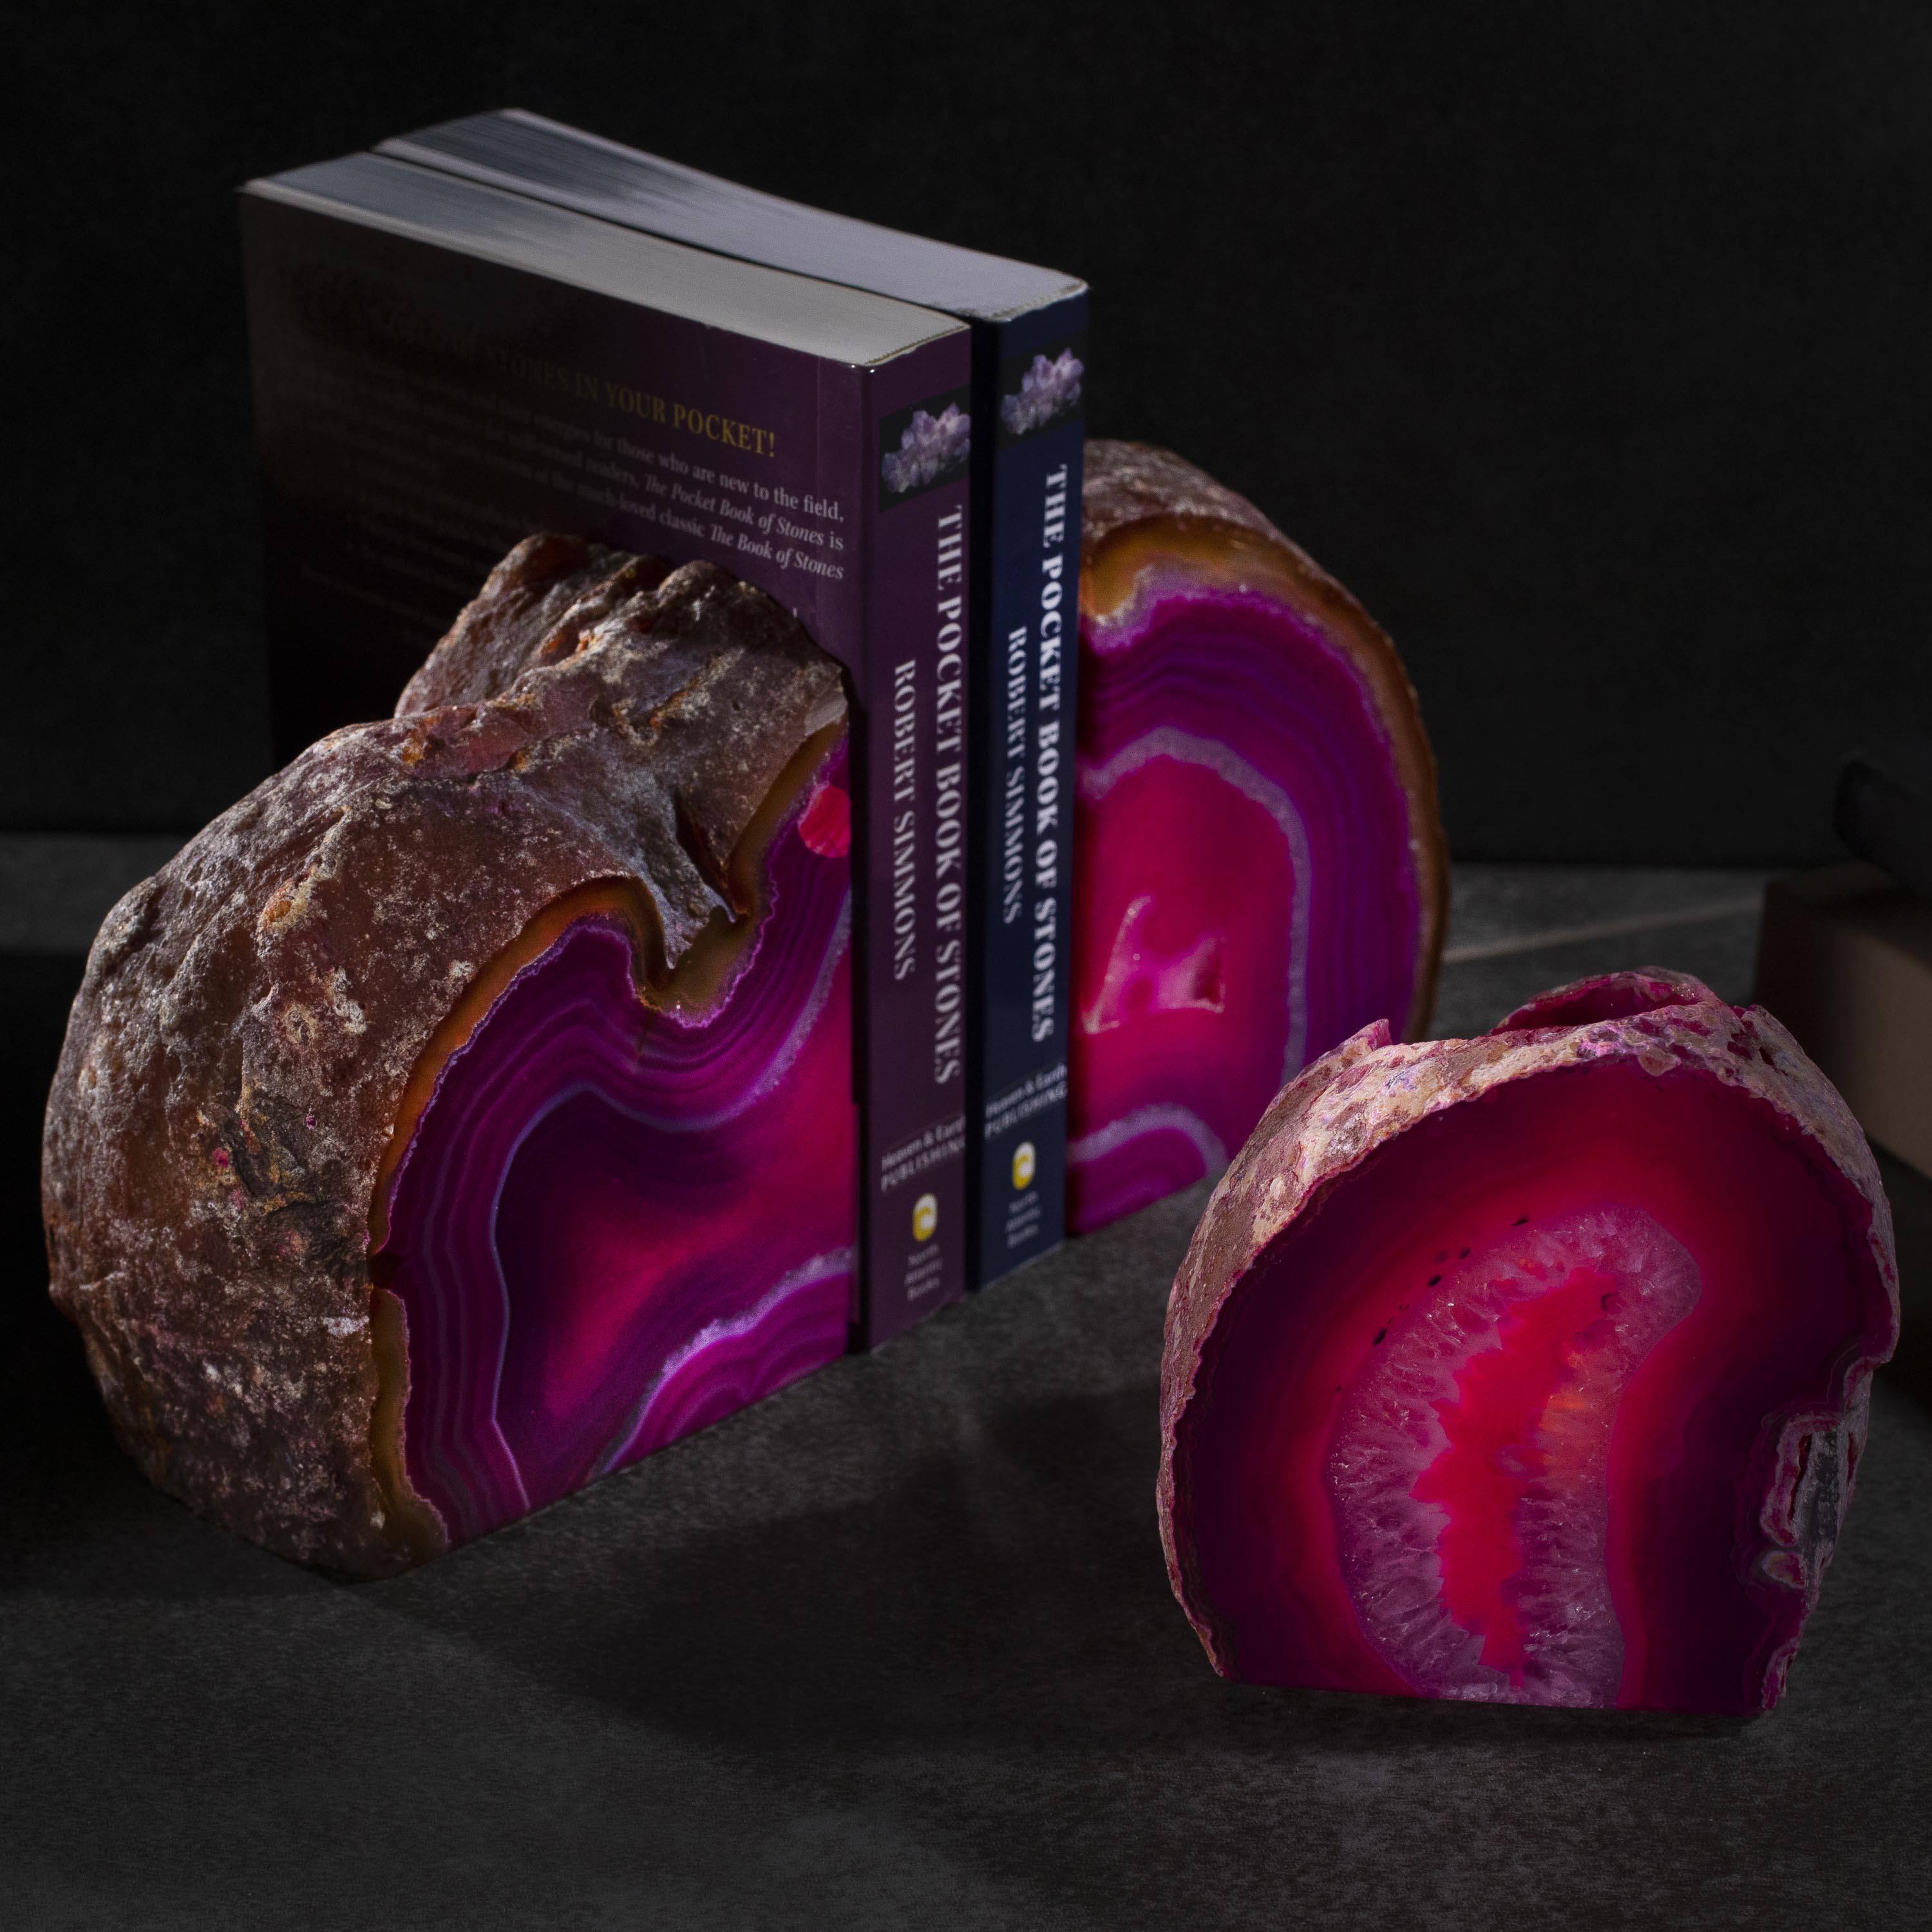 KALIFANO Agate Pink Agate Geode Bookend Set BAB240-PK